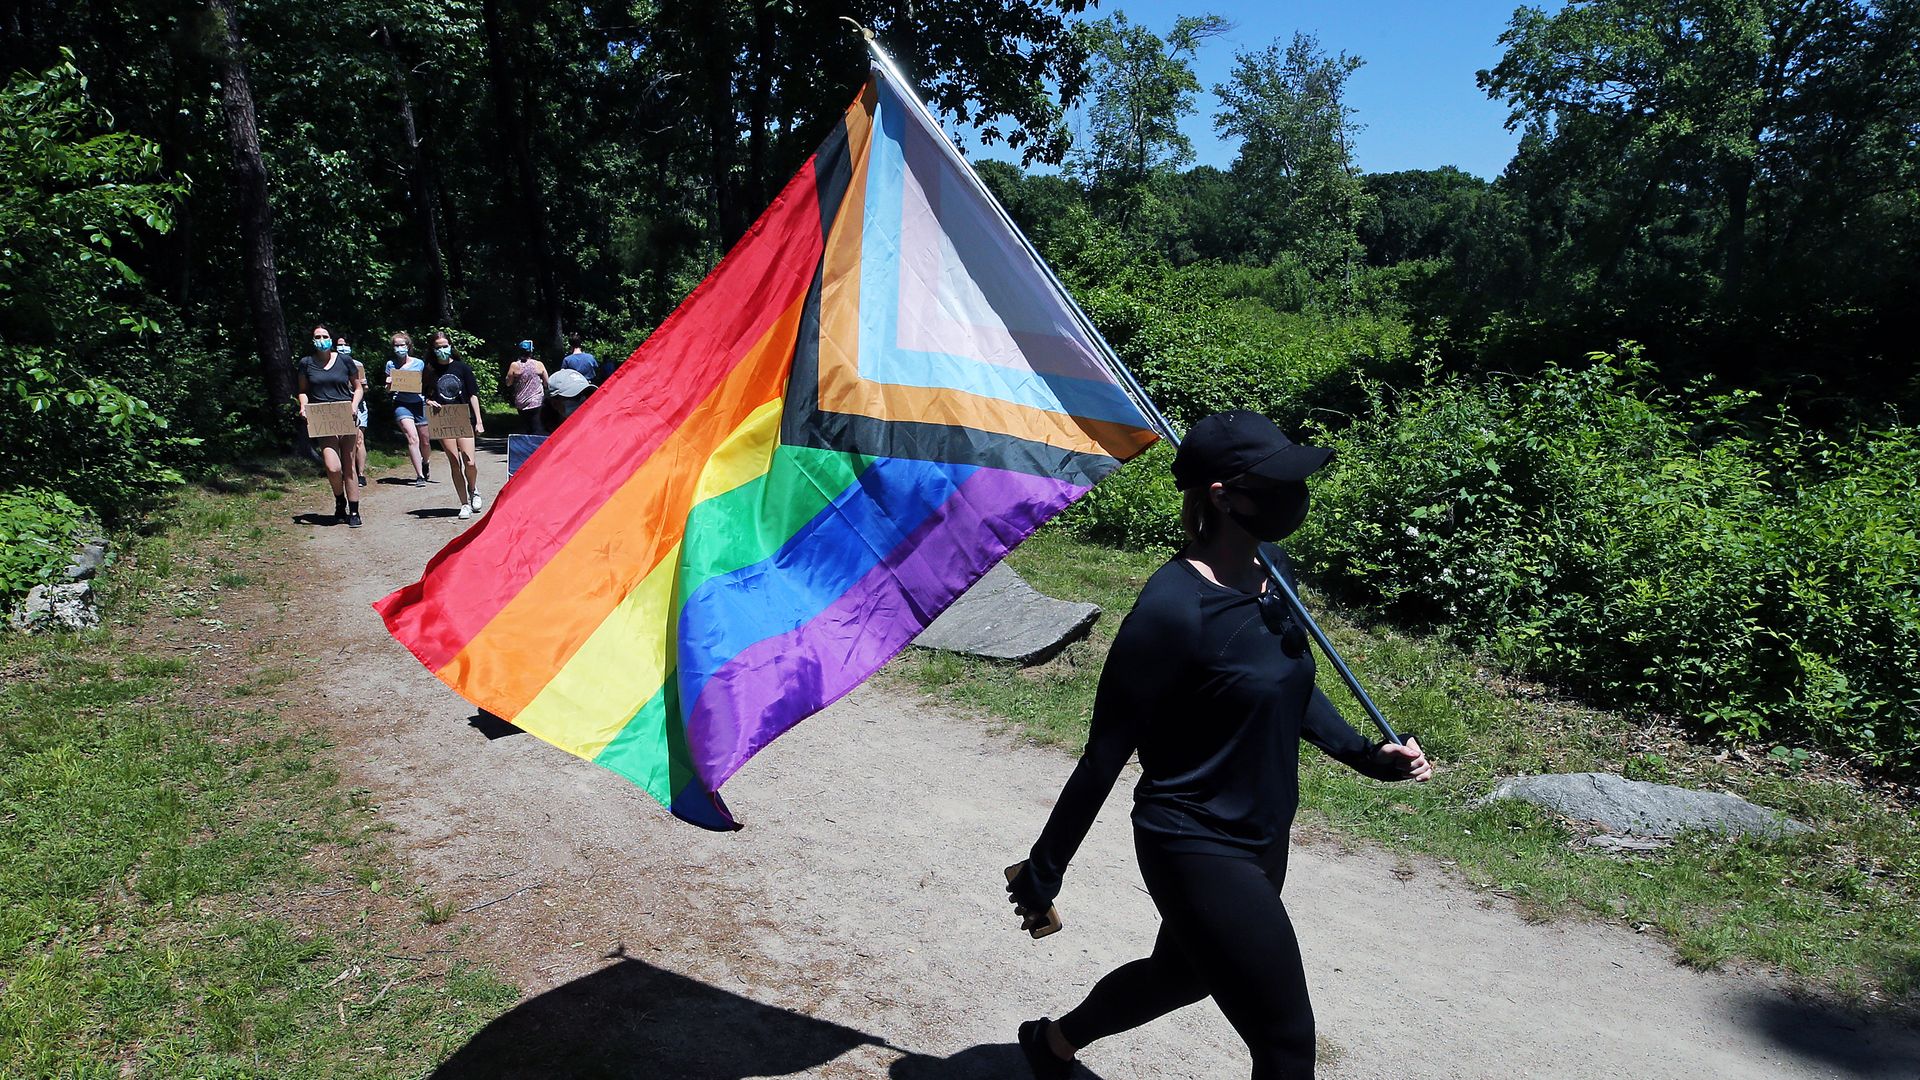 An LGBTQ flag is carried on a hiking trail surrounded by trees